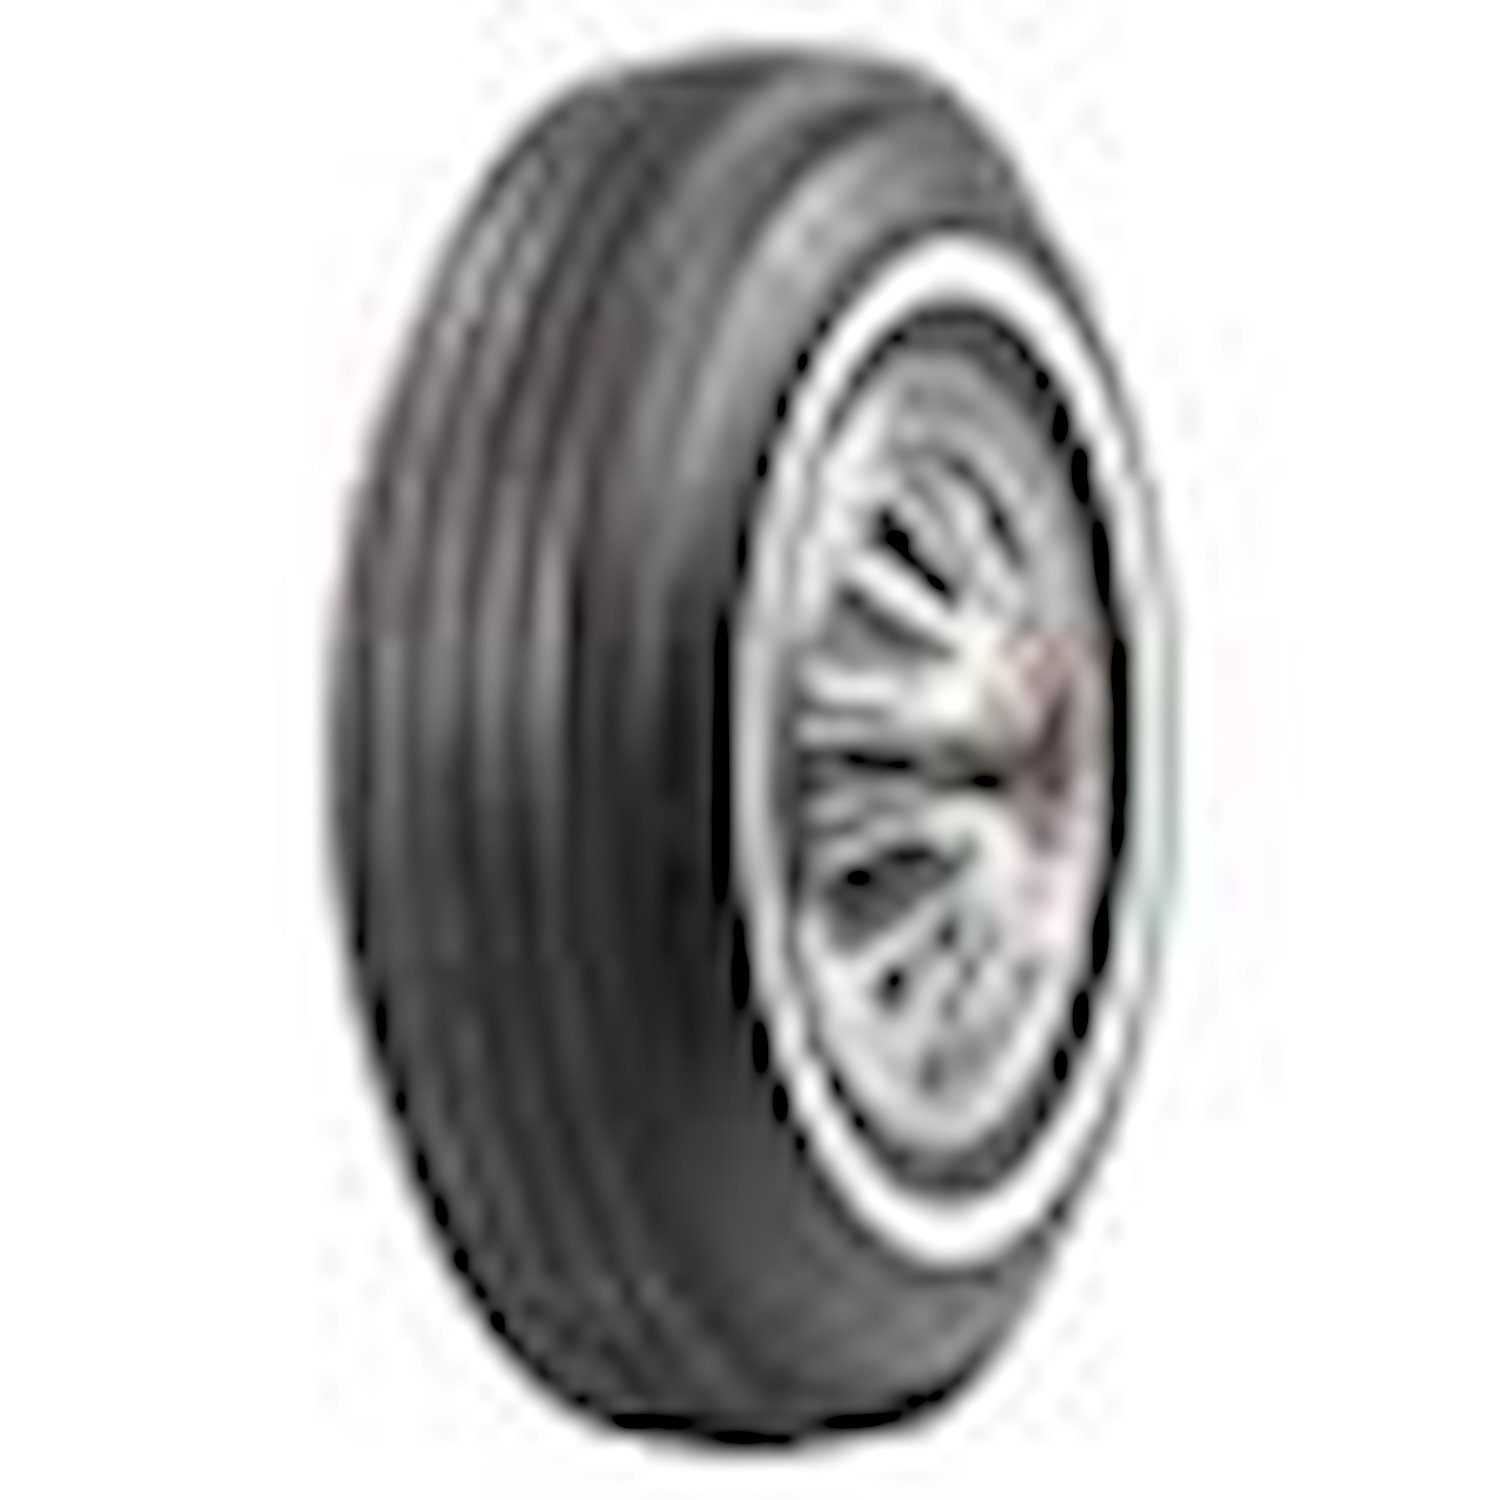 51040 Tire, US Royal 1.875-Inch Whitewall, 650-13